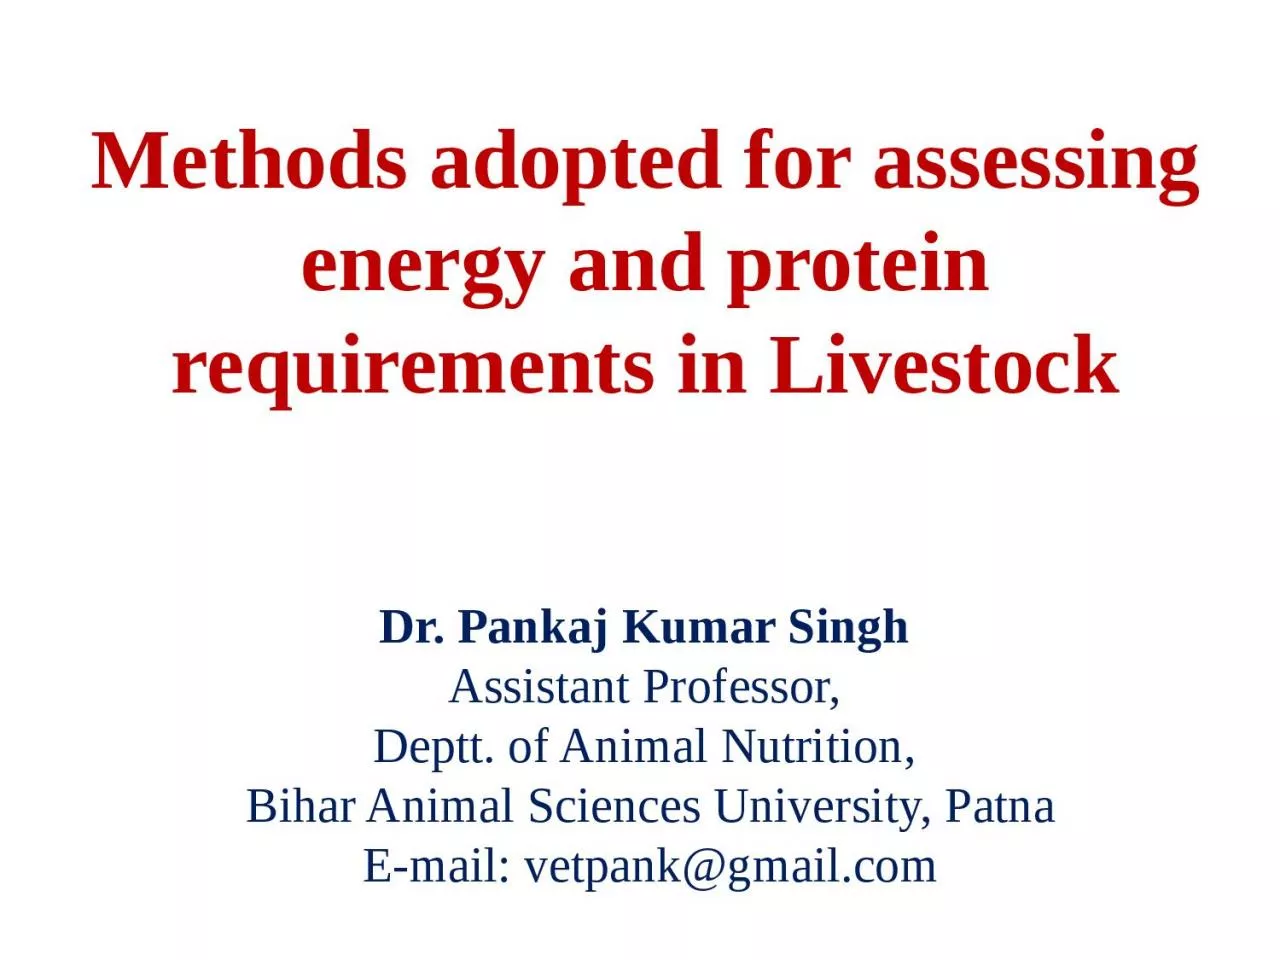 Methods adopted for assessing energy and protein requirements in Livestock